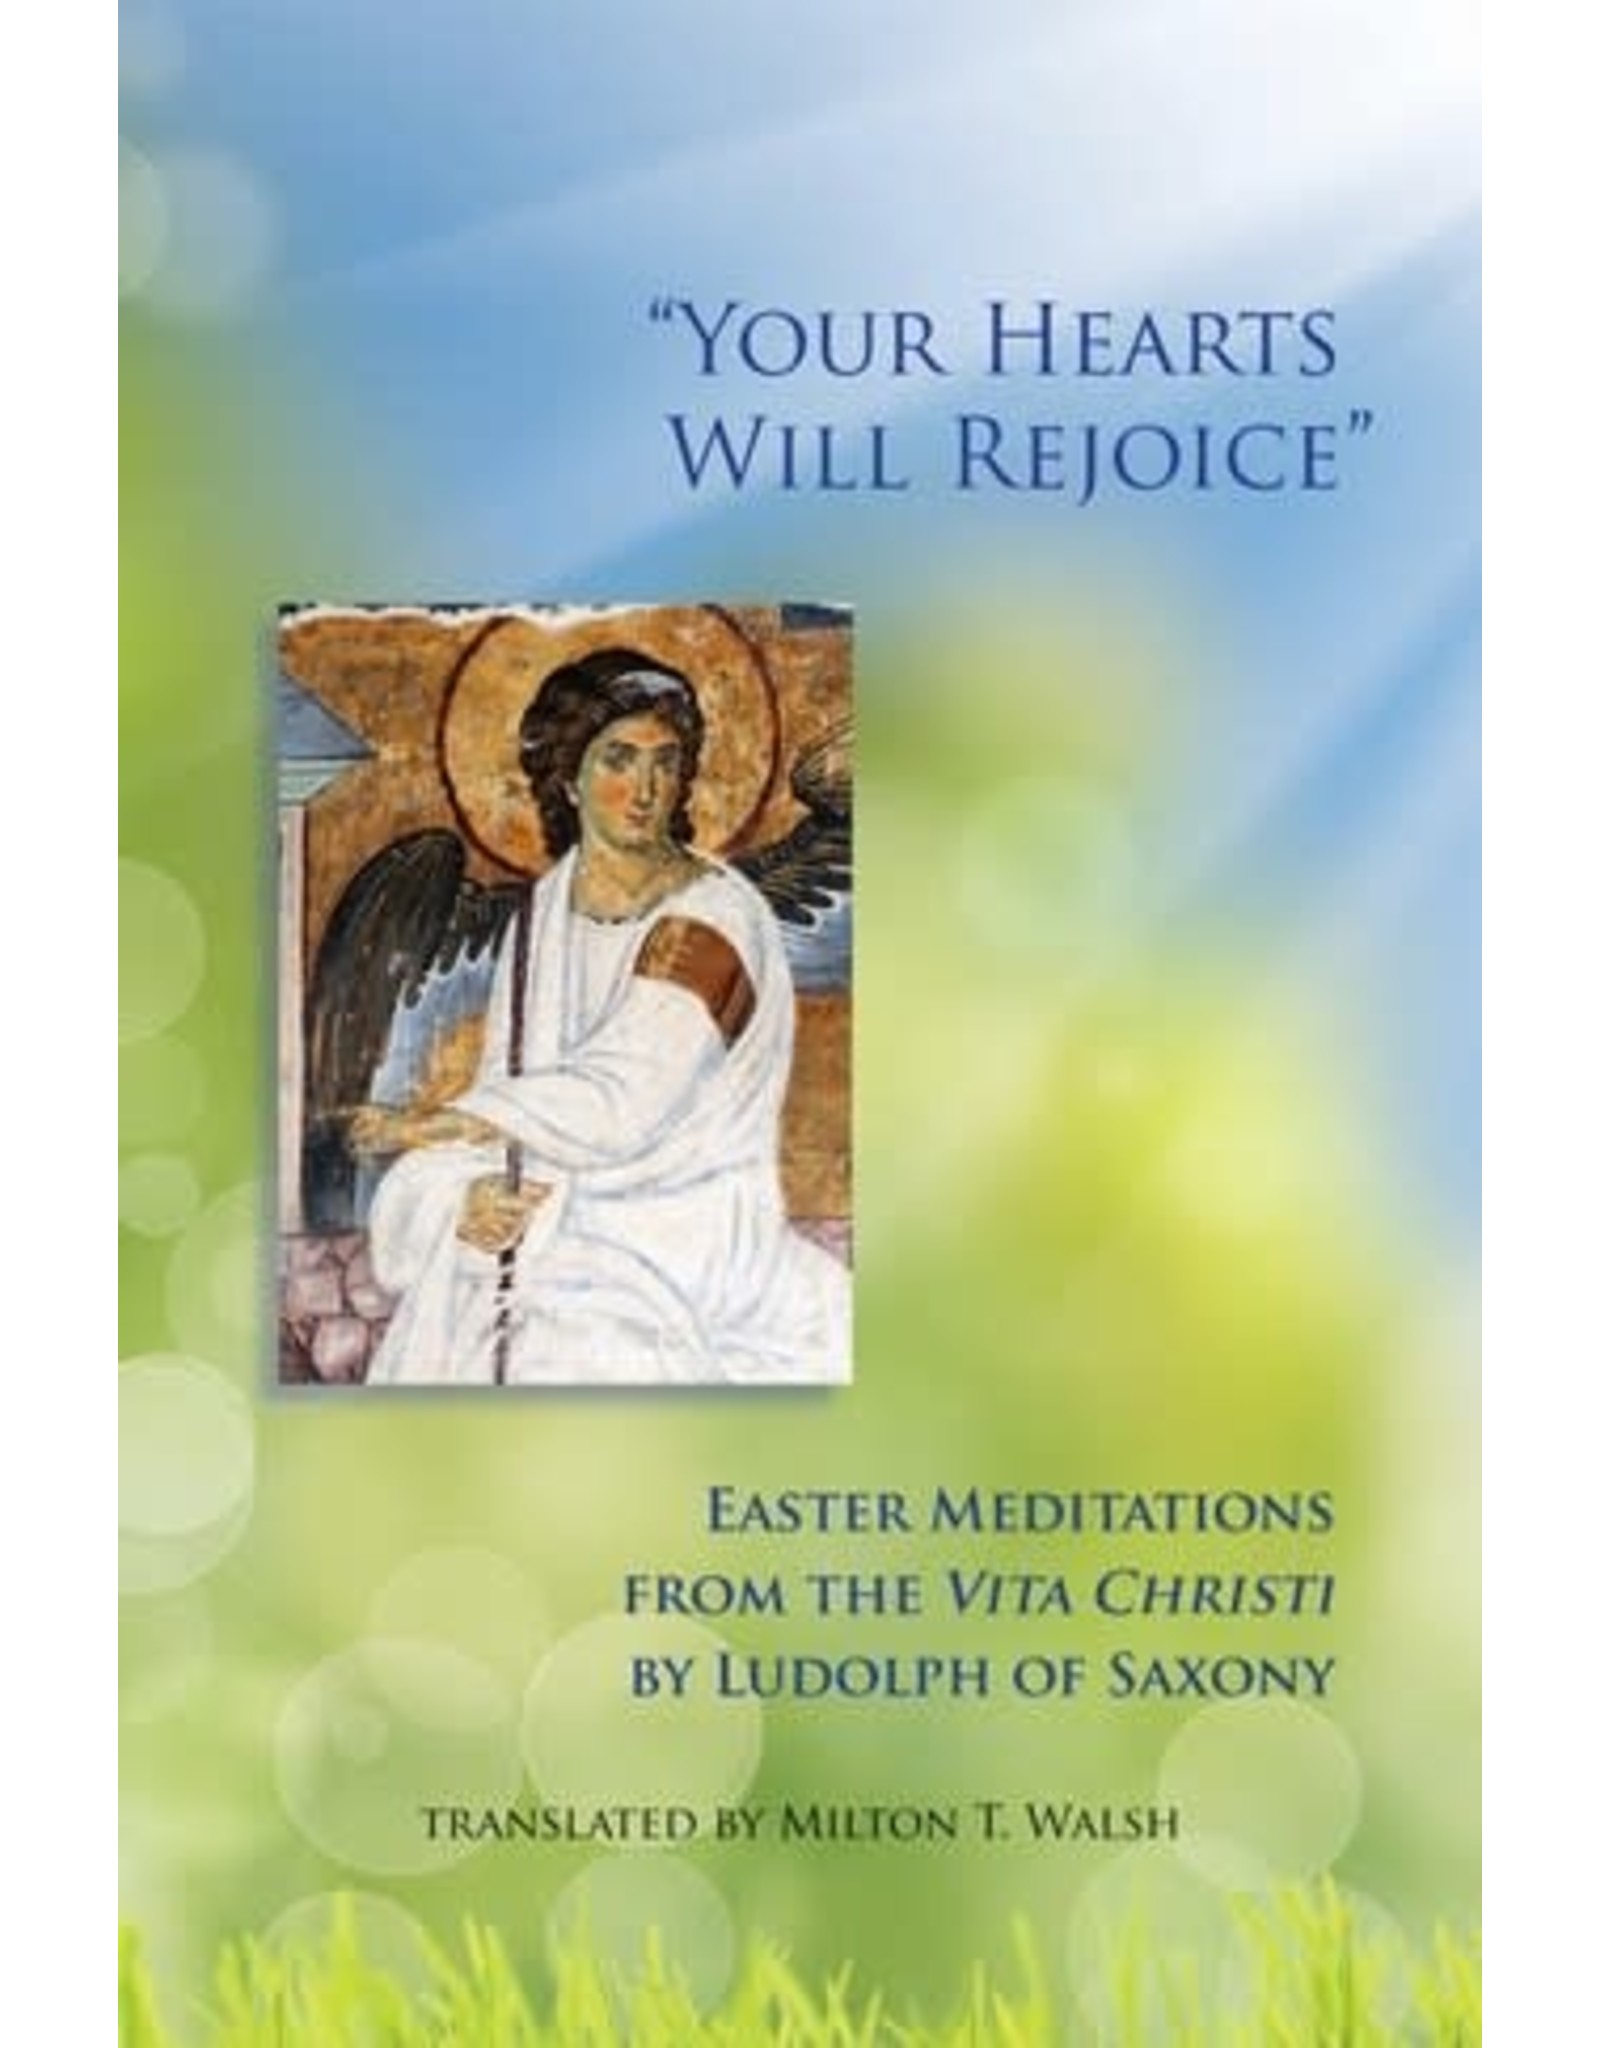 Cistercian Publications "Your Hearts Will Rejoice" Easter Meditations from the Vita Christi